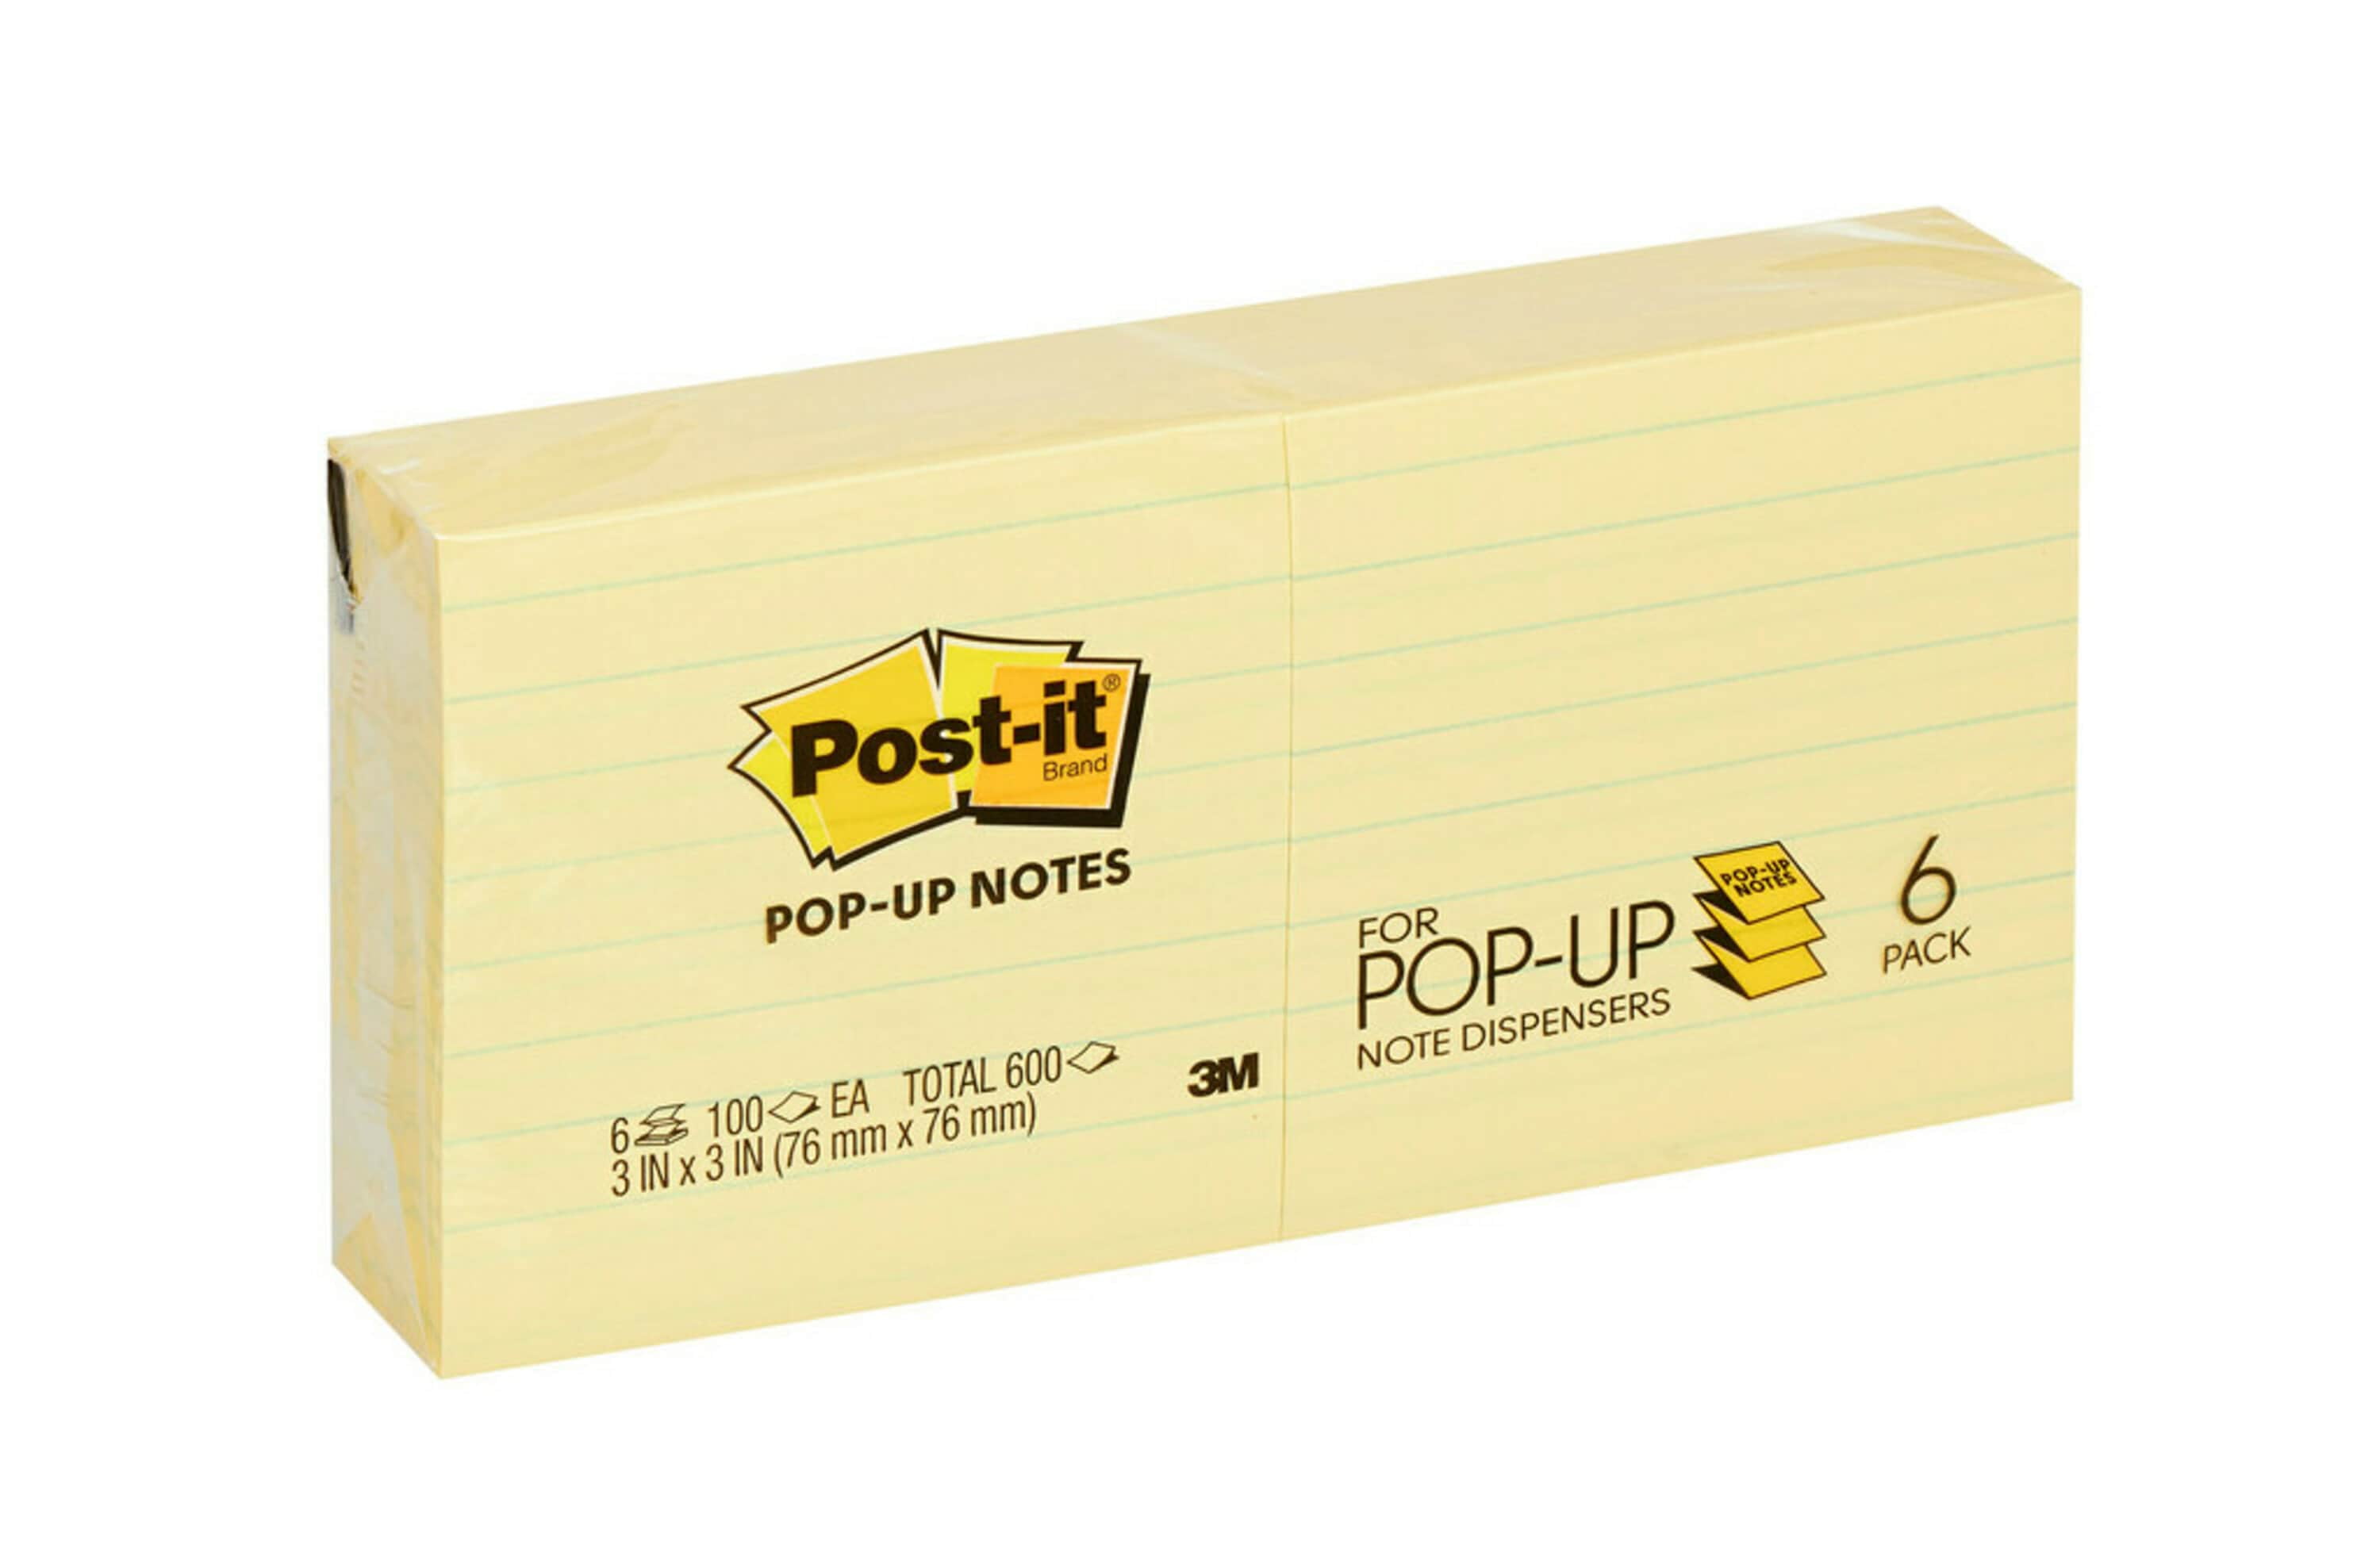 3/"x 3/" Square Post-it; Pop-up Dispenser Notes Canary Yellow 100-3/" x 3/"